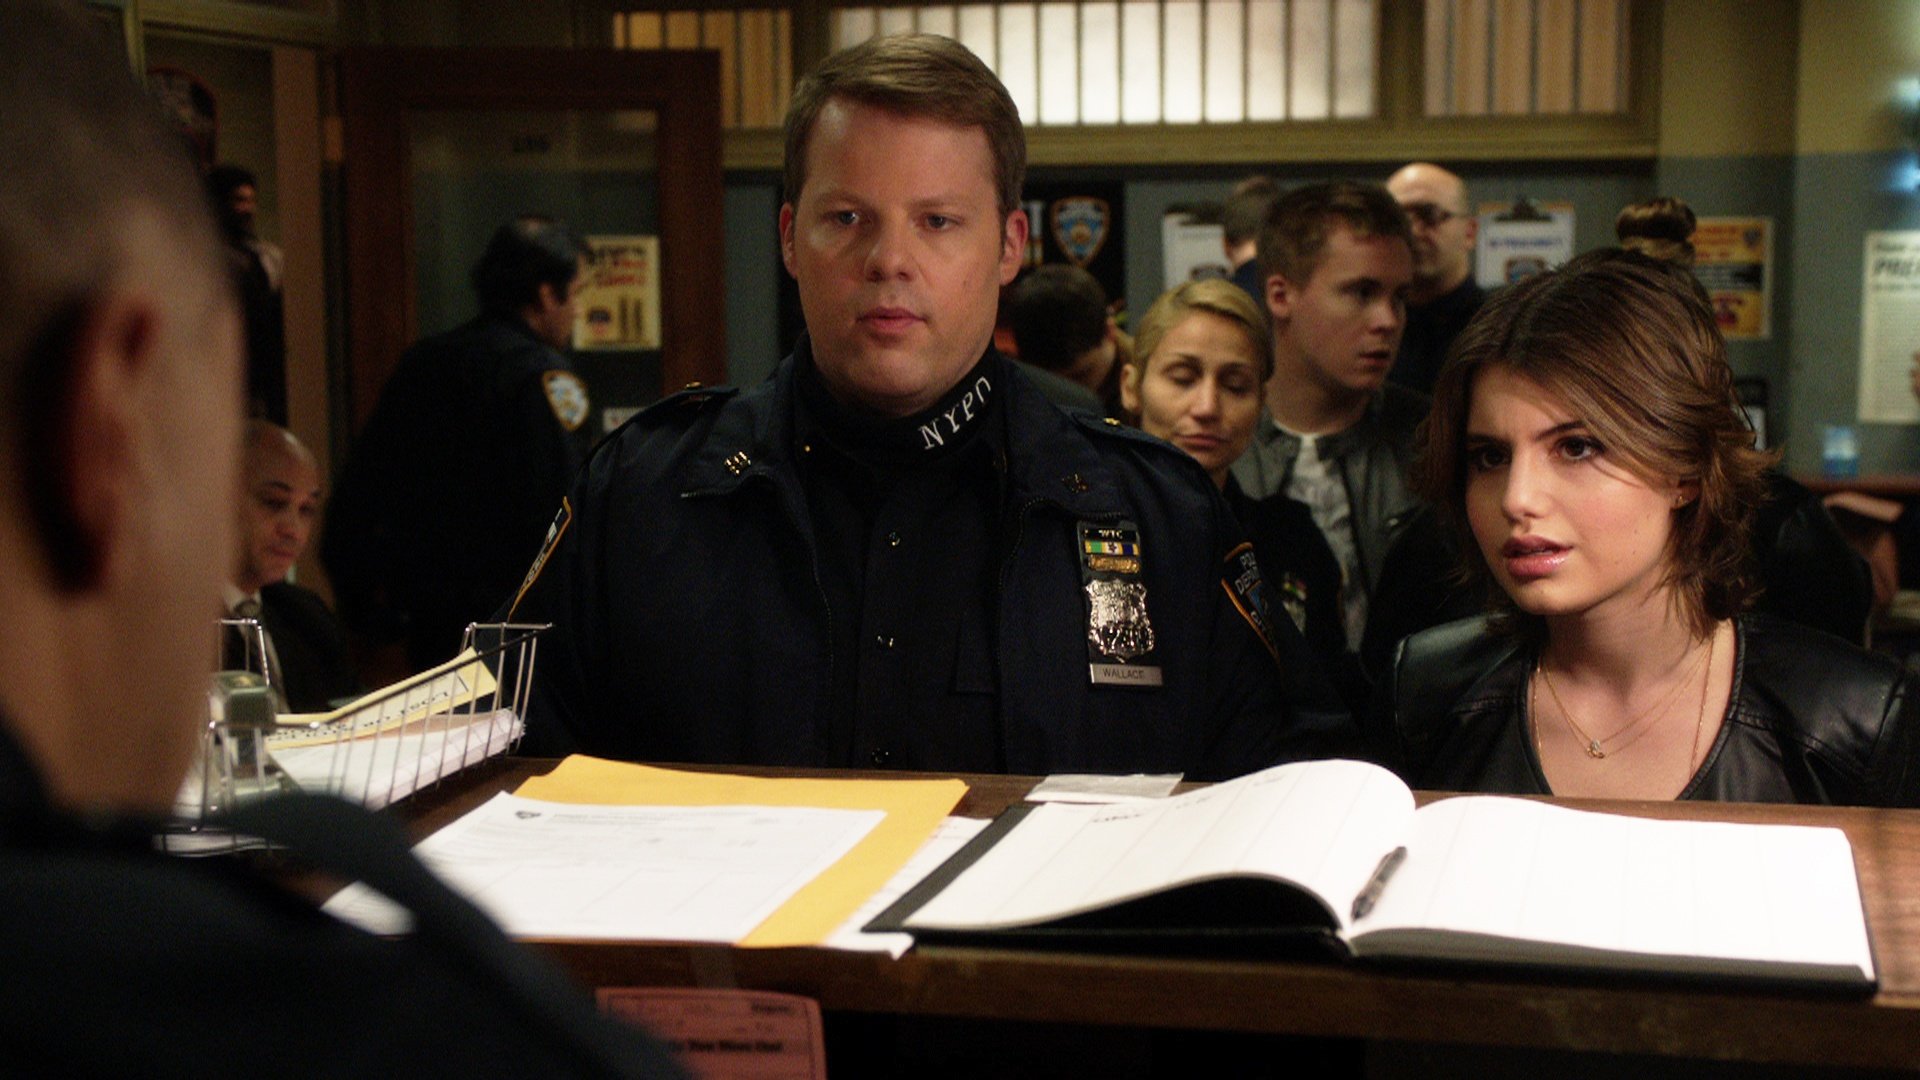 Sami Gayle as Nicky stands next to a police officer in a police station on Blue Bloods 